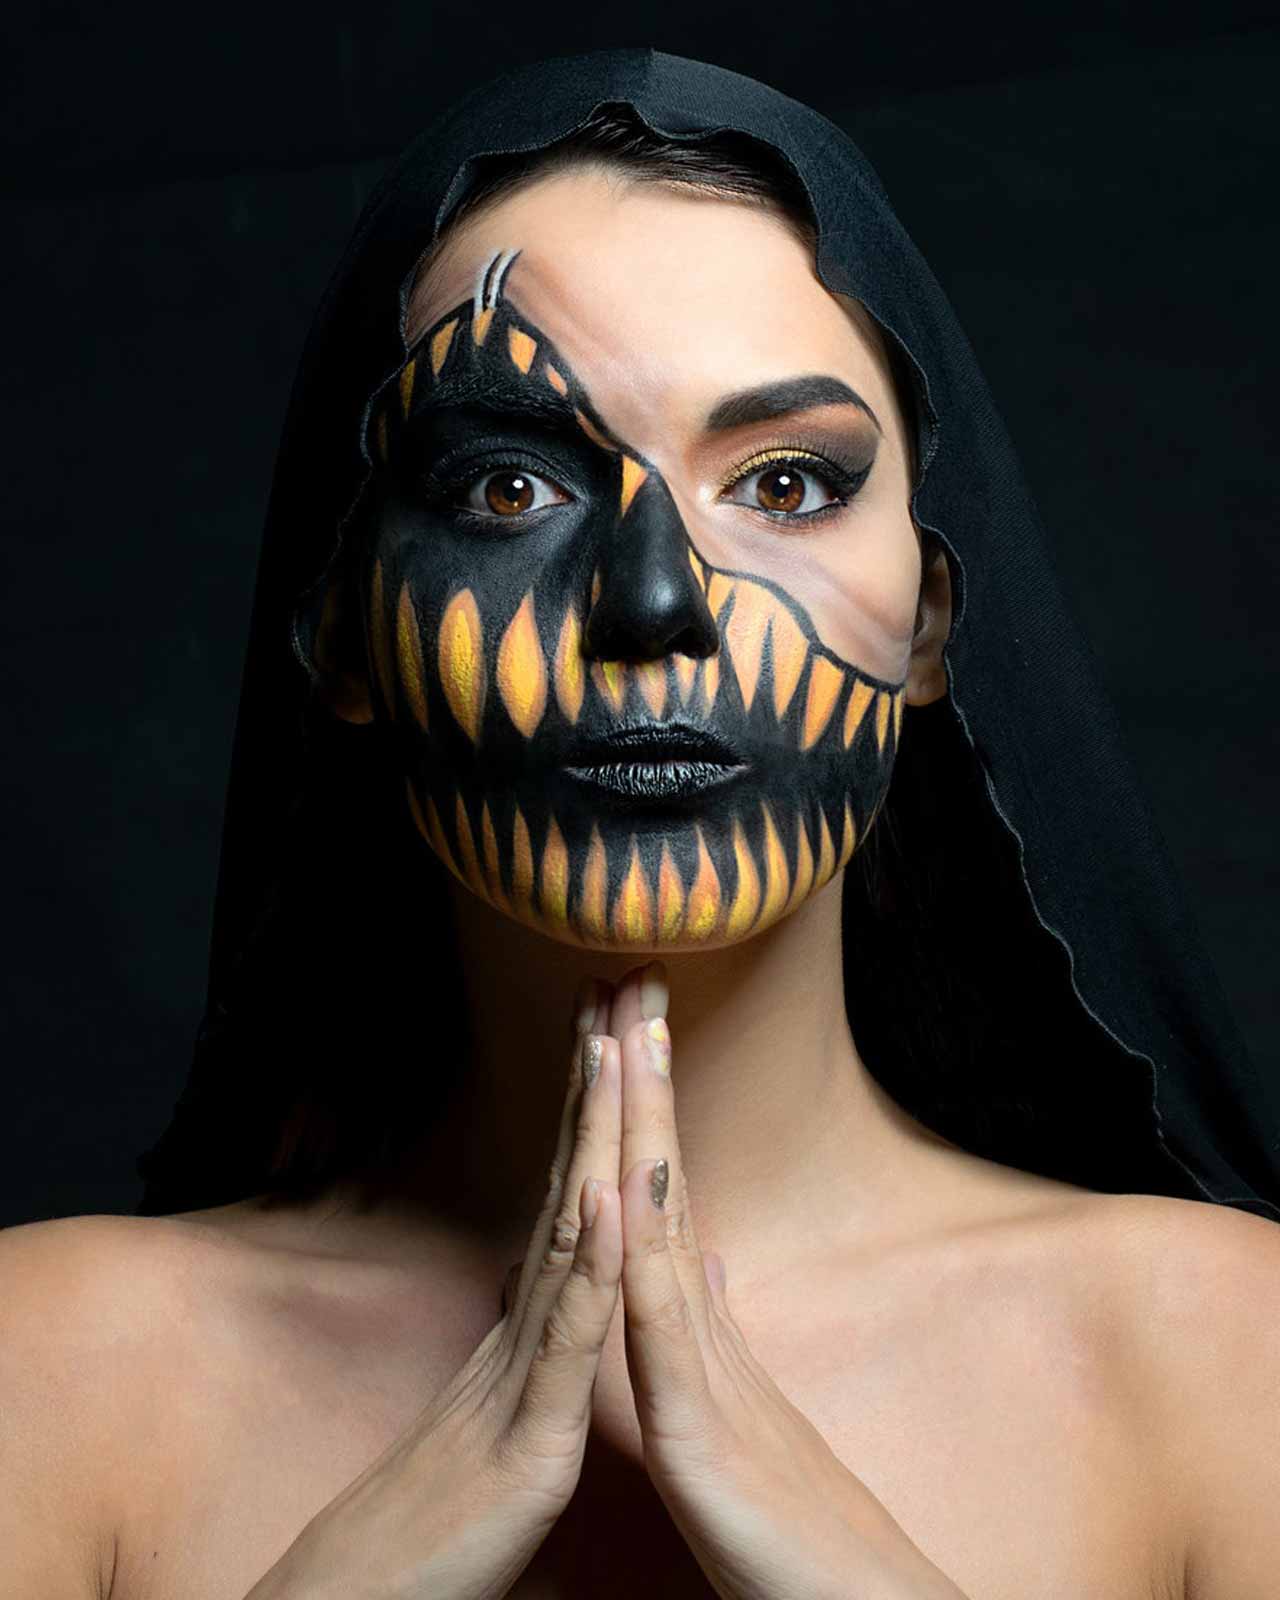 photo-of-woman-with-face-paint-4035259